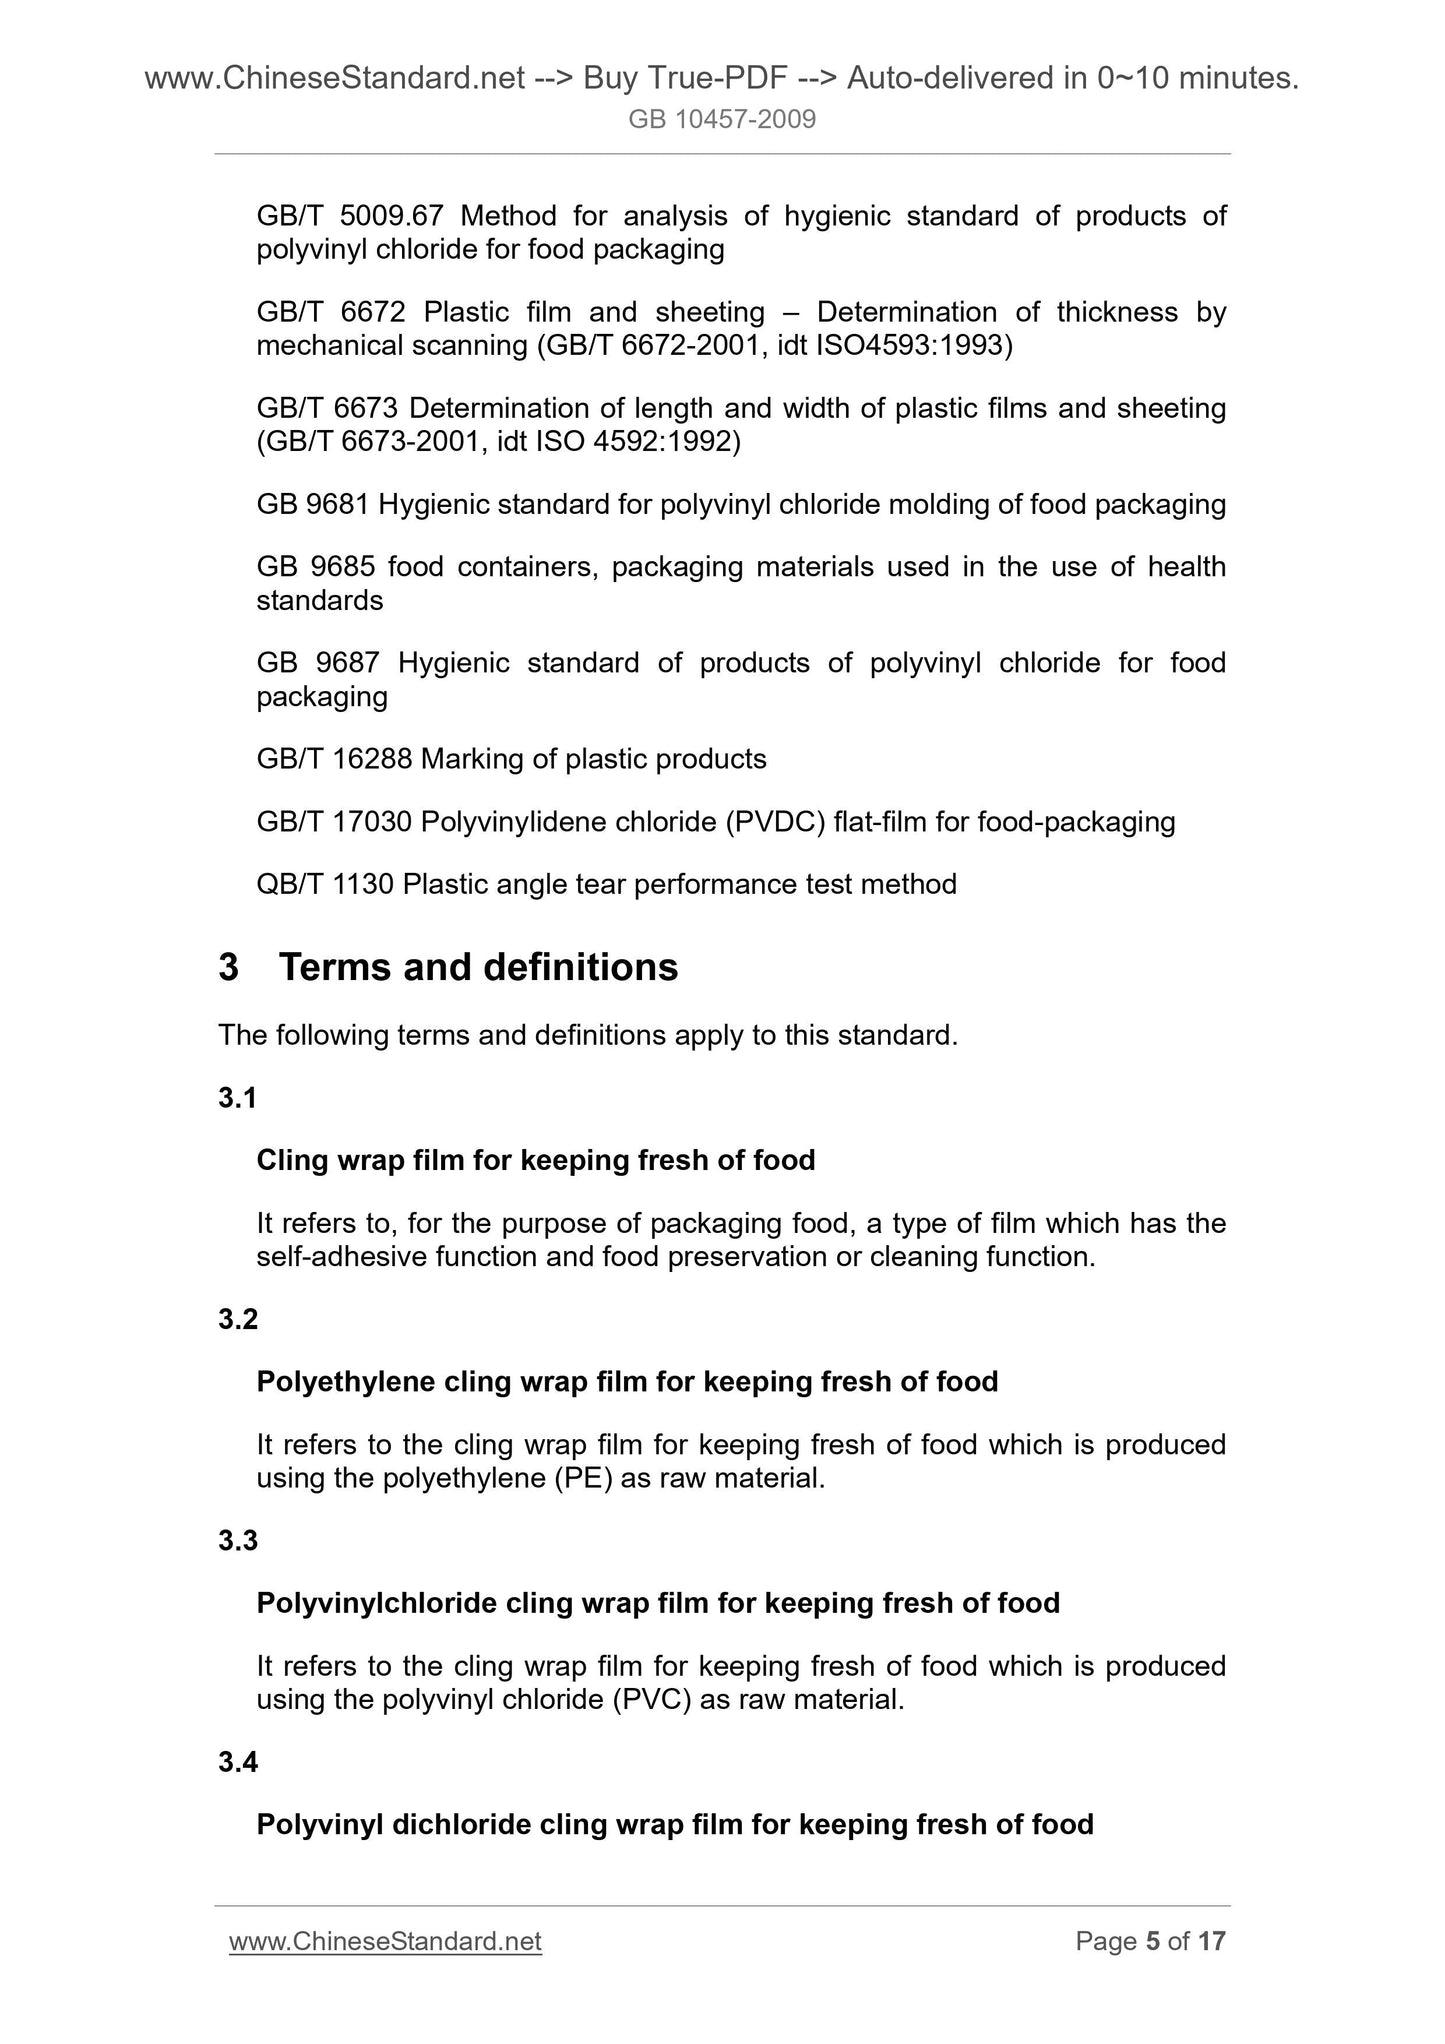 GB 10457-2009 Page 5